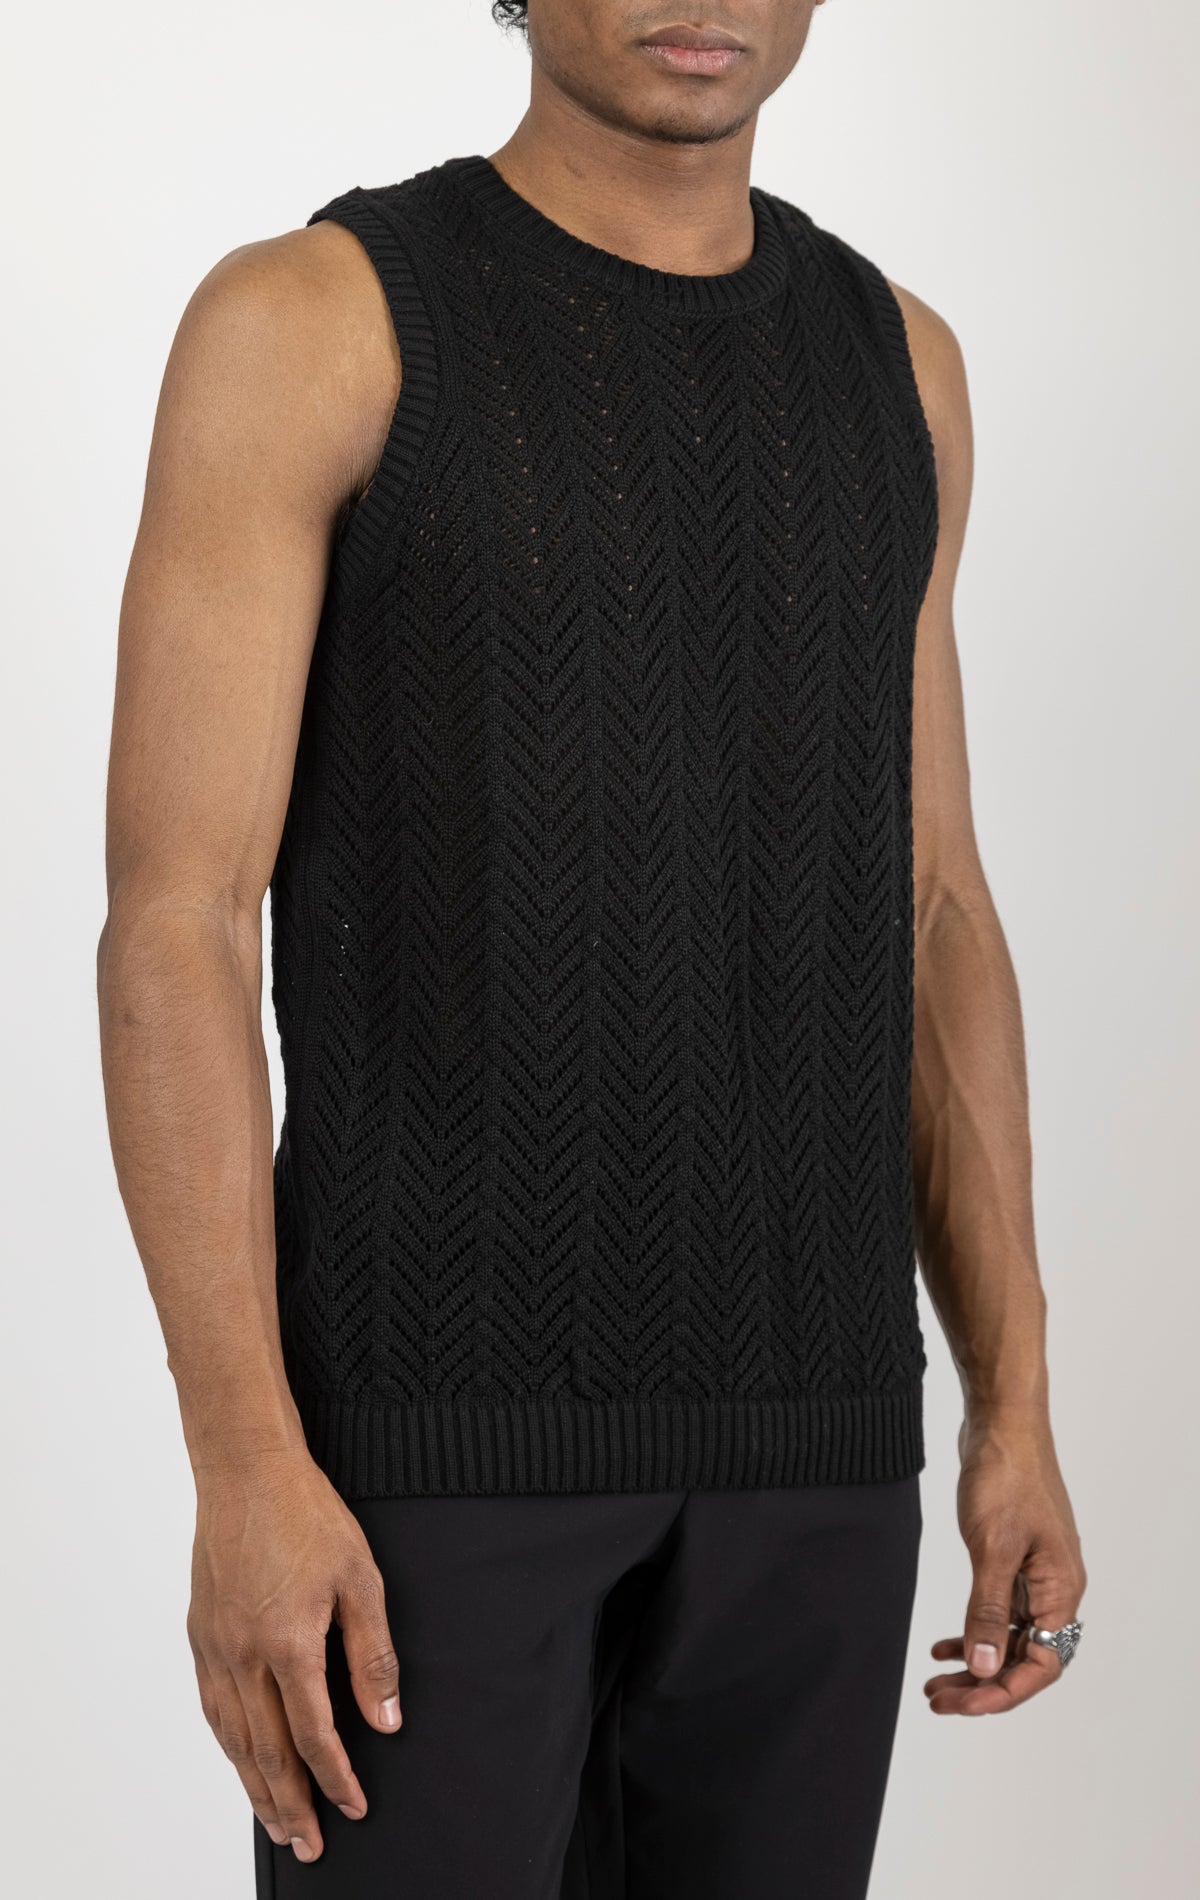 Men's knit muscle fit tank top in black. The tank top is made from a 50% cotton, 50% acrylic blend and features a muscle fit cut, sleeveless construction, and a textured knit fabric.